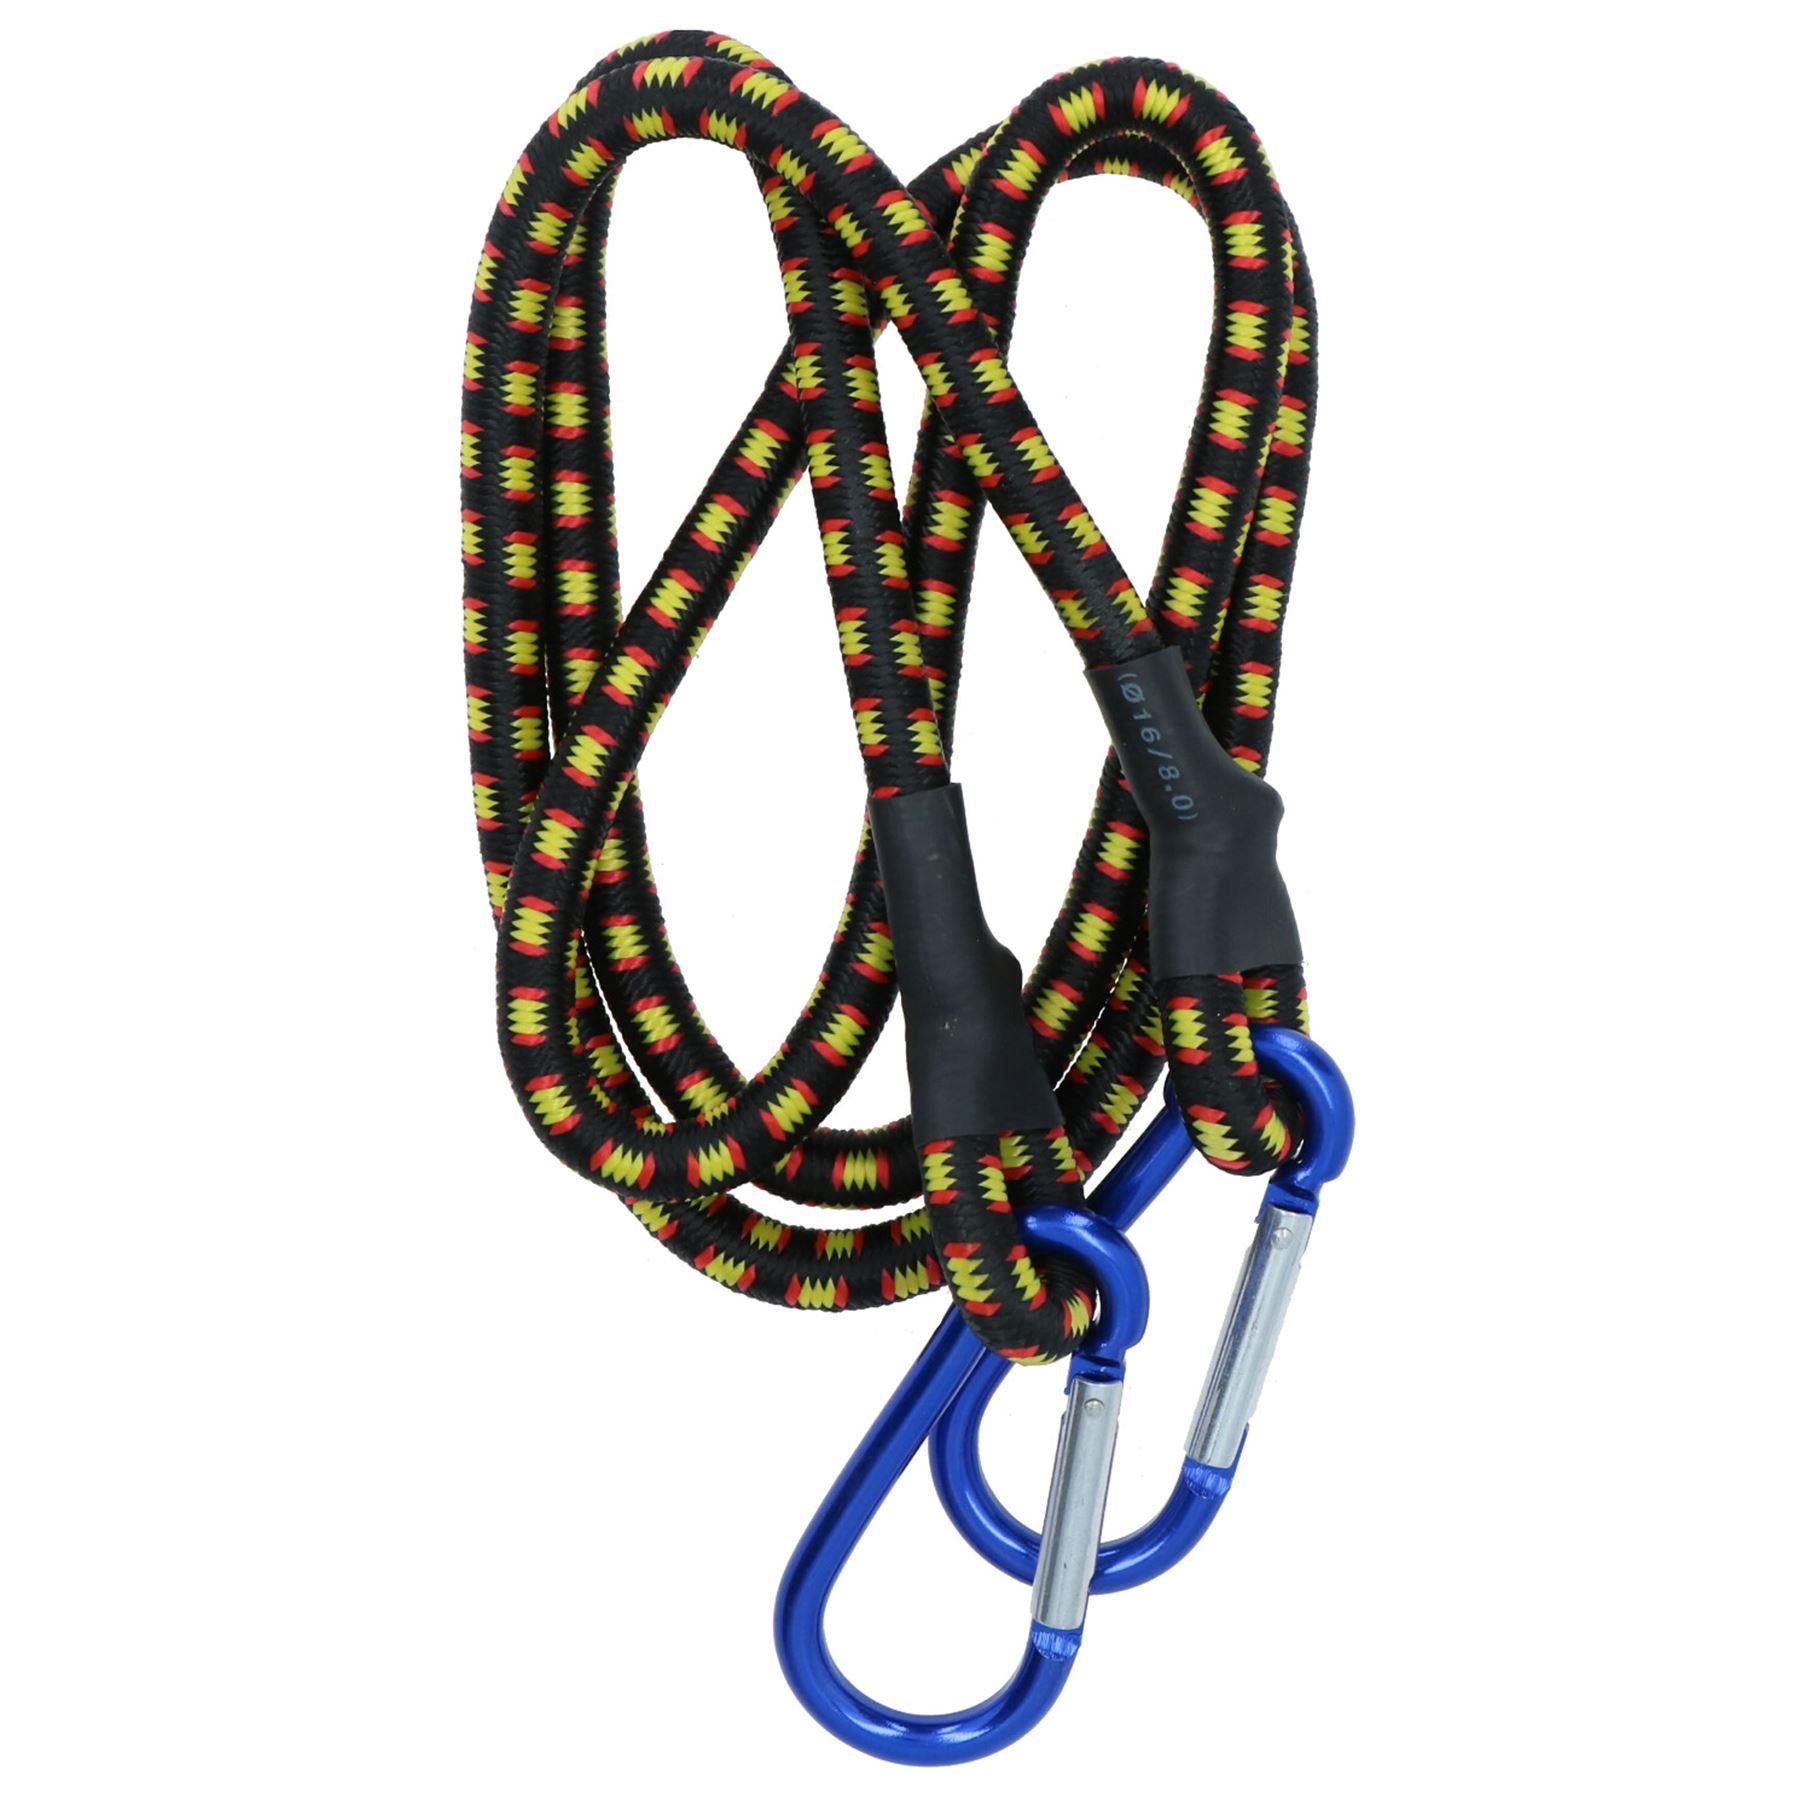 48” Bungee Strap with Aluminium Carabiners Hook Tie Down Fastener Holder